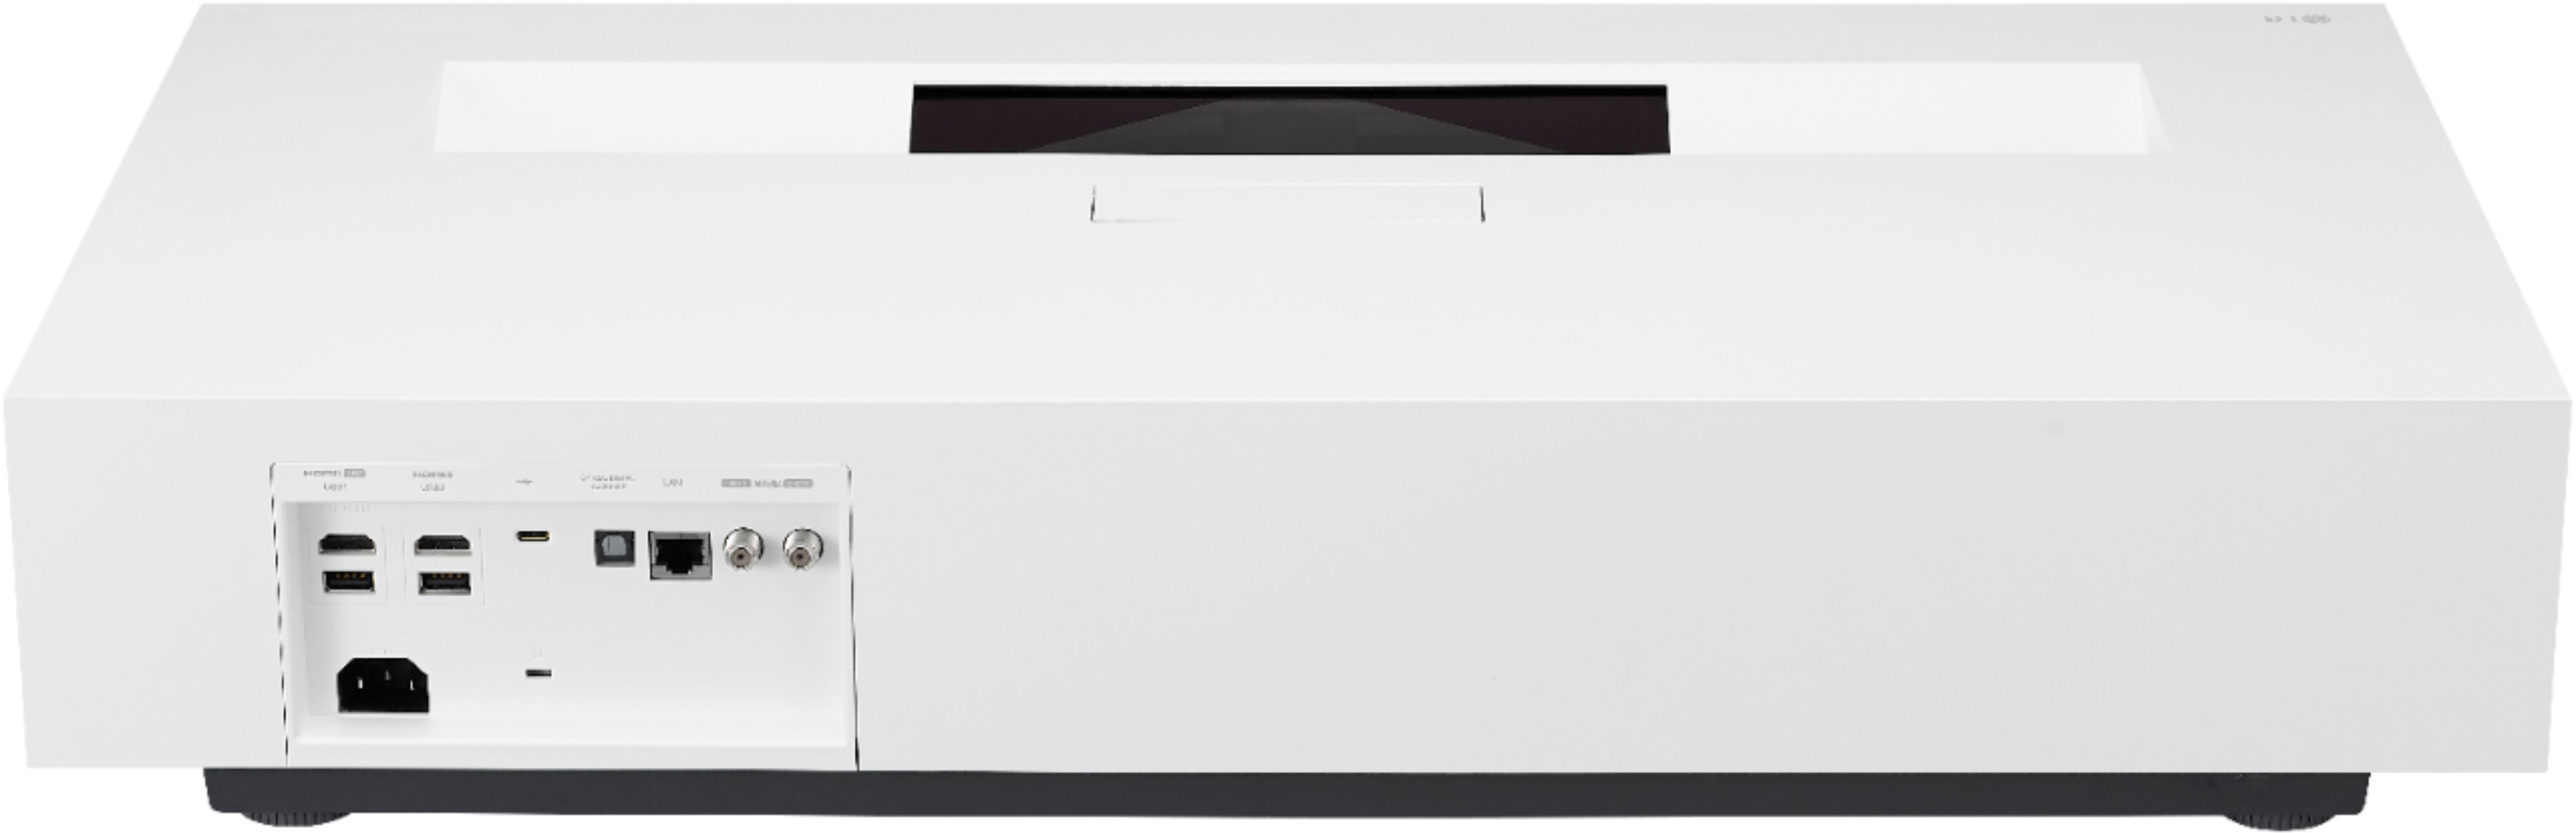 Back View: LG - 6.3 cu ft Electric Slide In Range with Air Fry and Smart Wi-Fi Enabled - Black stainless steel